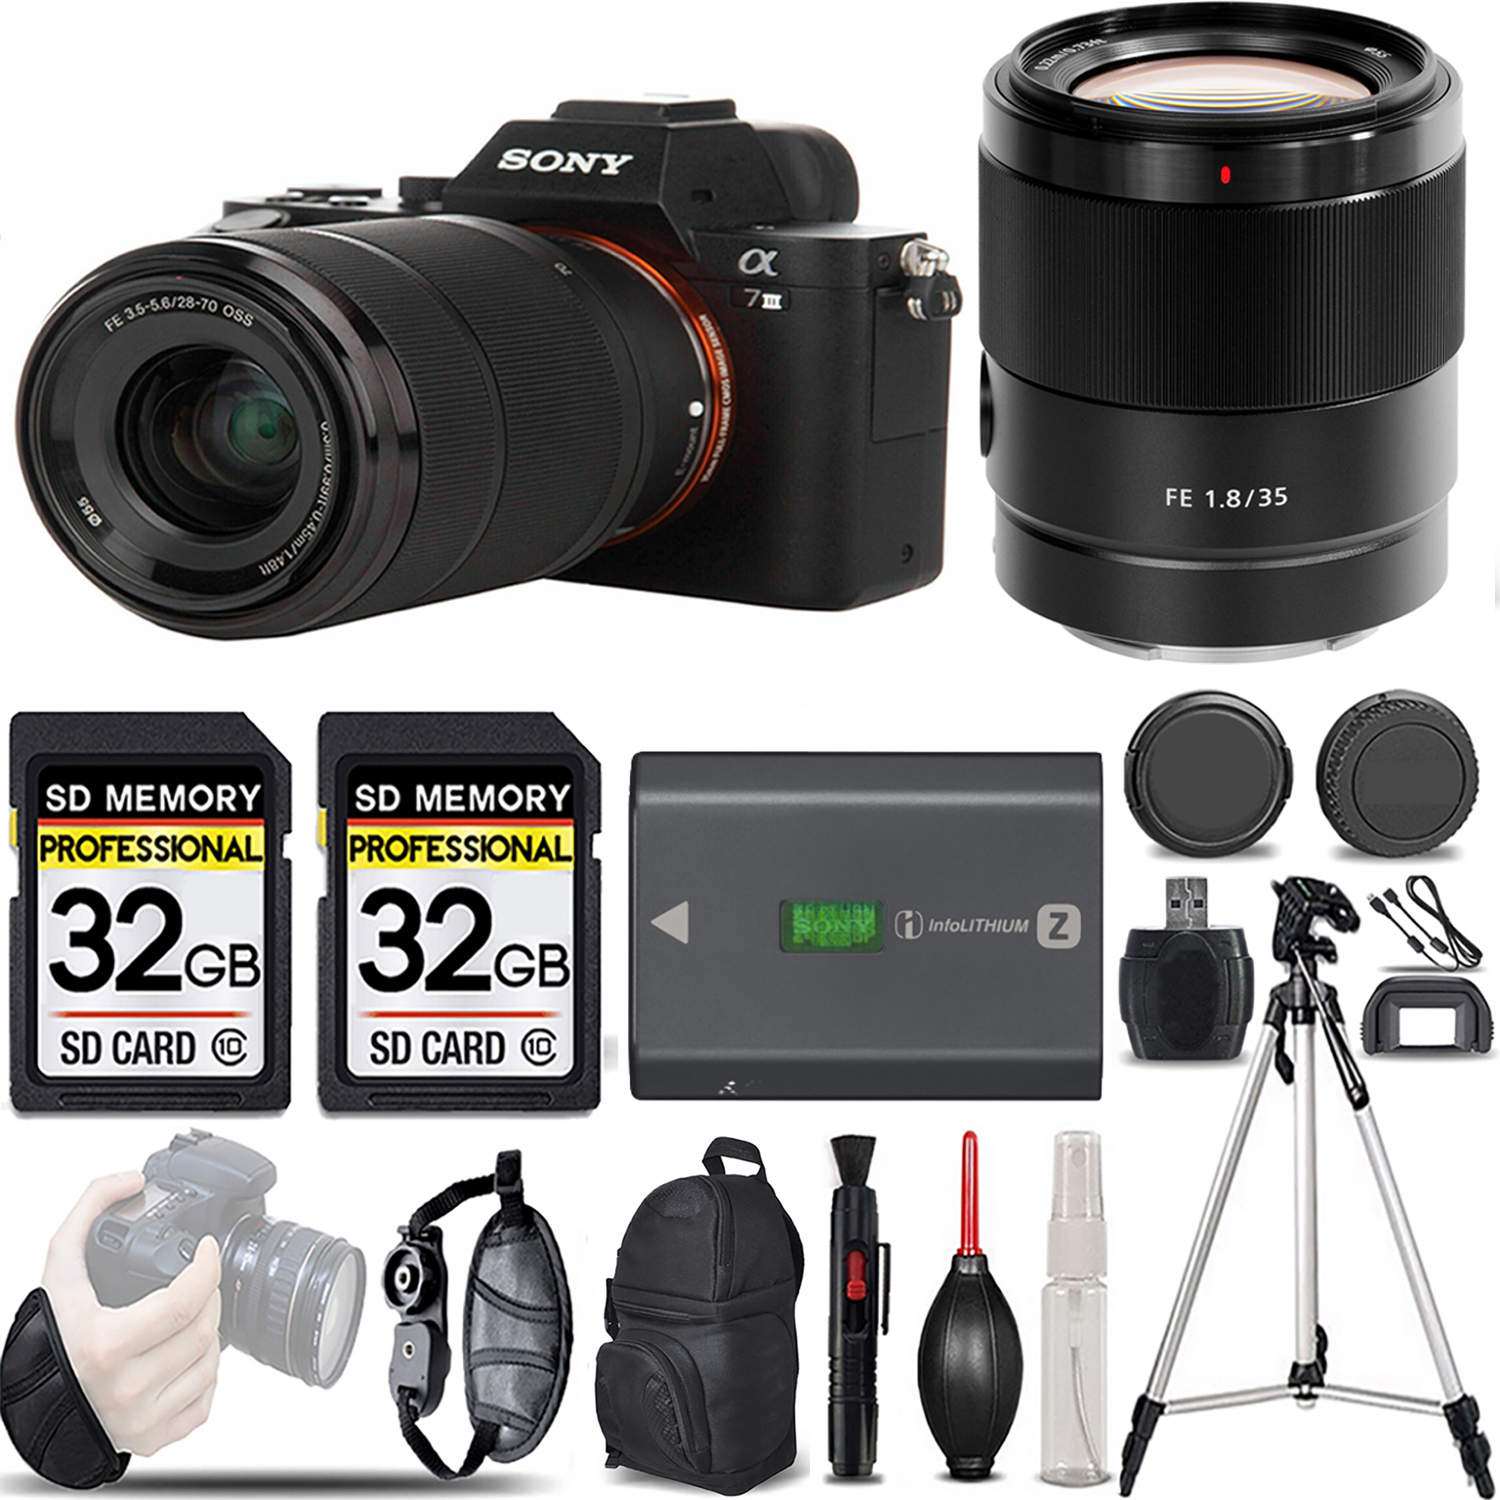 a7 III  Camera + 28-70mm Lens + 35mm Lens + Extra Battery + Bag + 64Gb & More! *FREE SHIPPING*